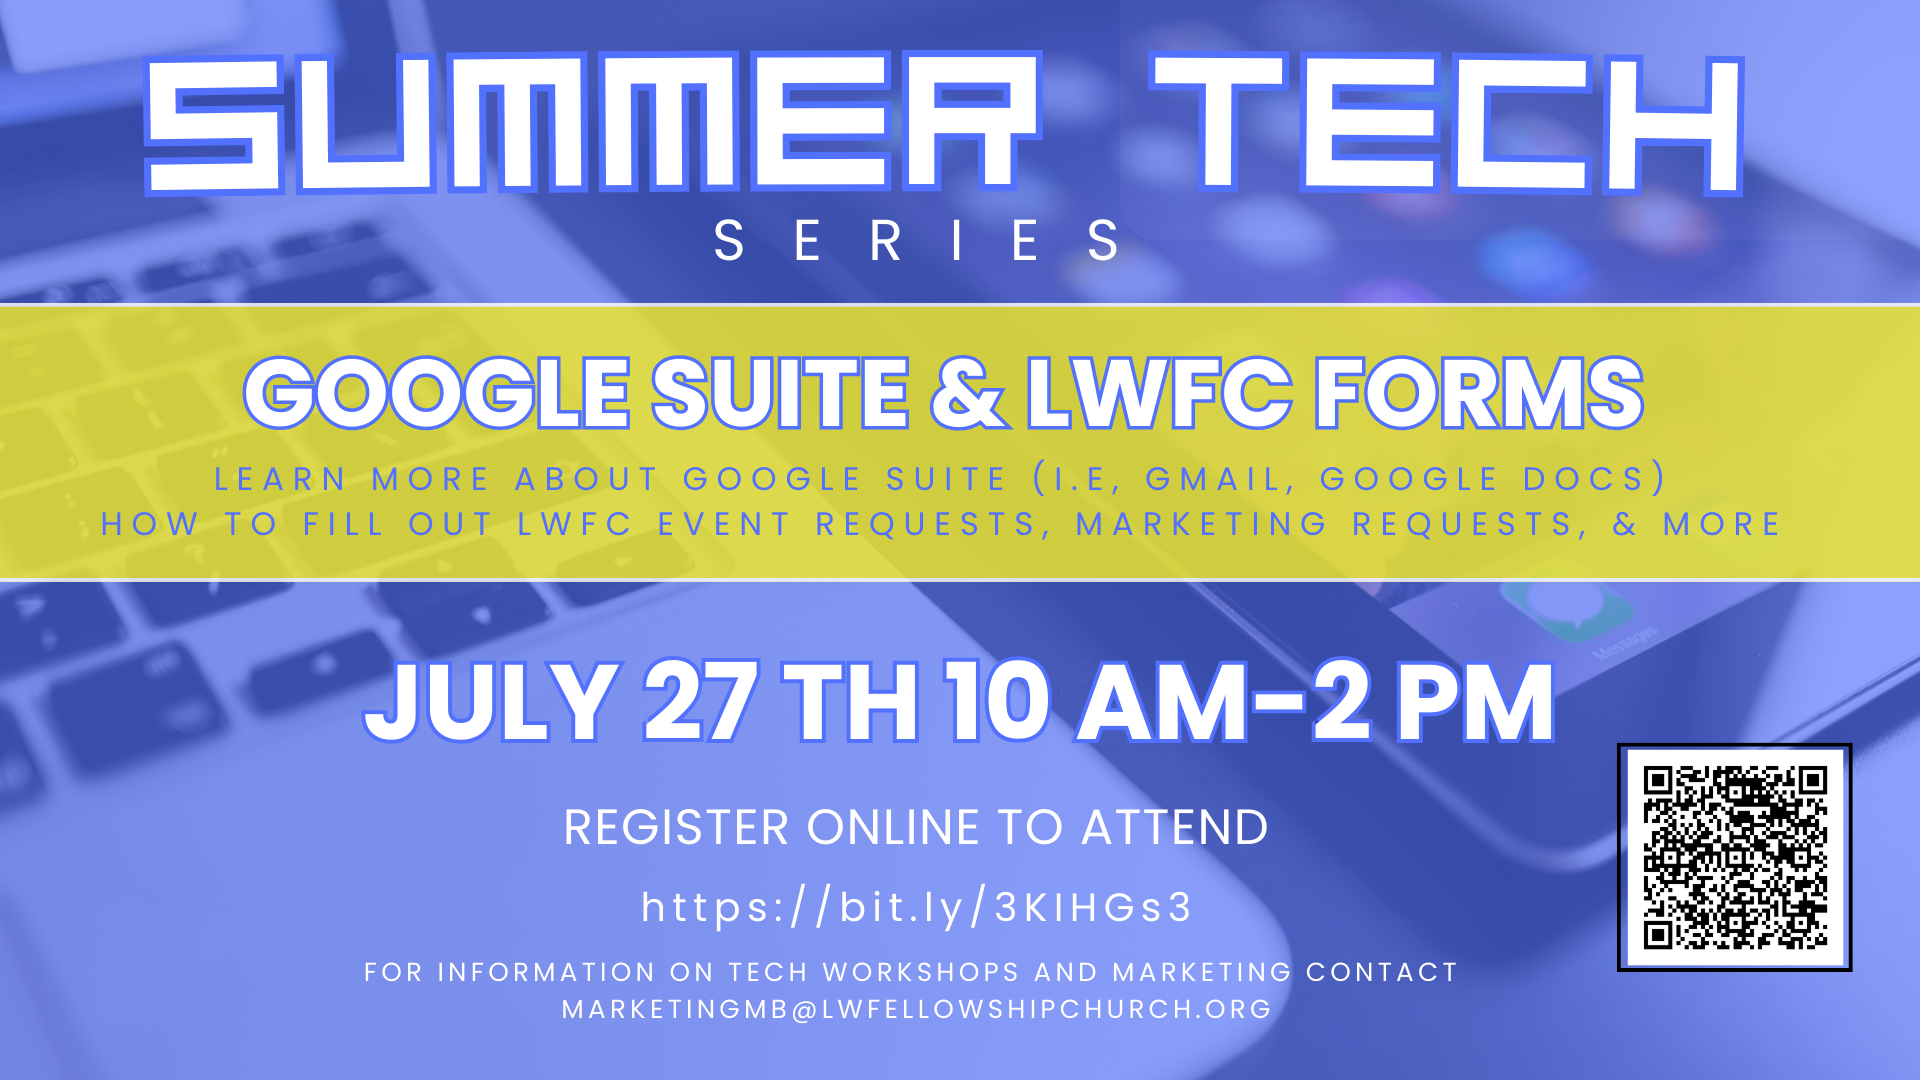 Summer Tech Series – Free Google Suite & LWFC Forms head image